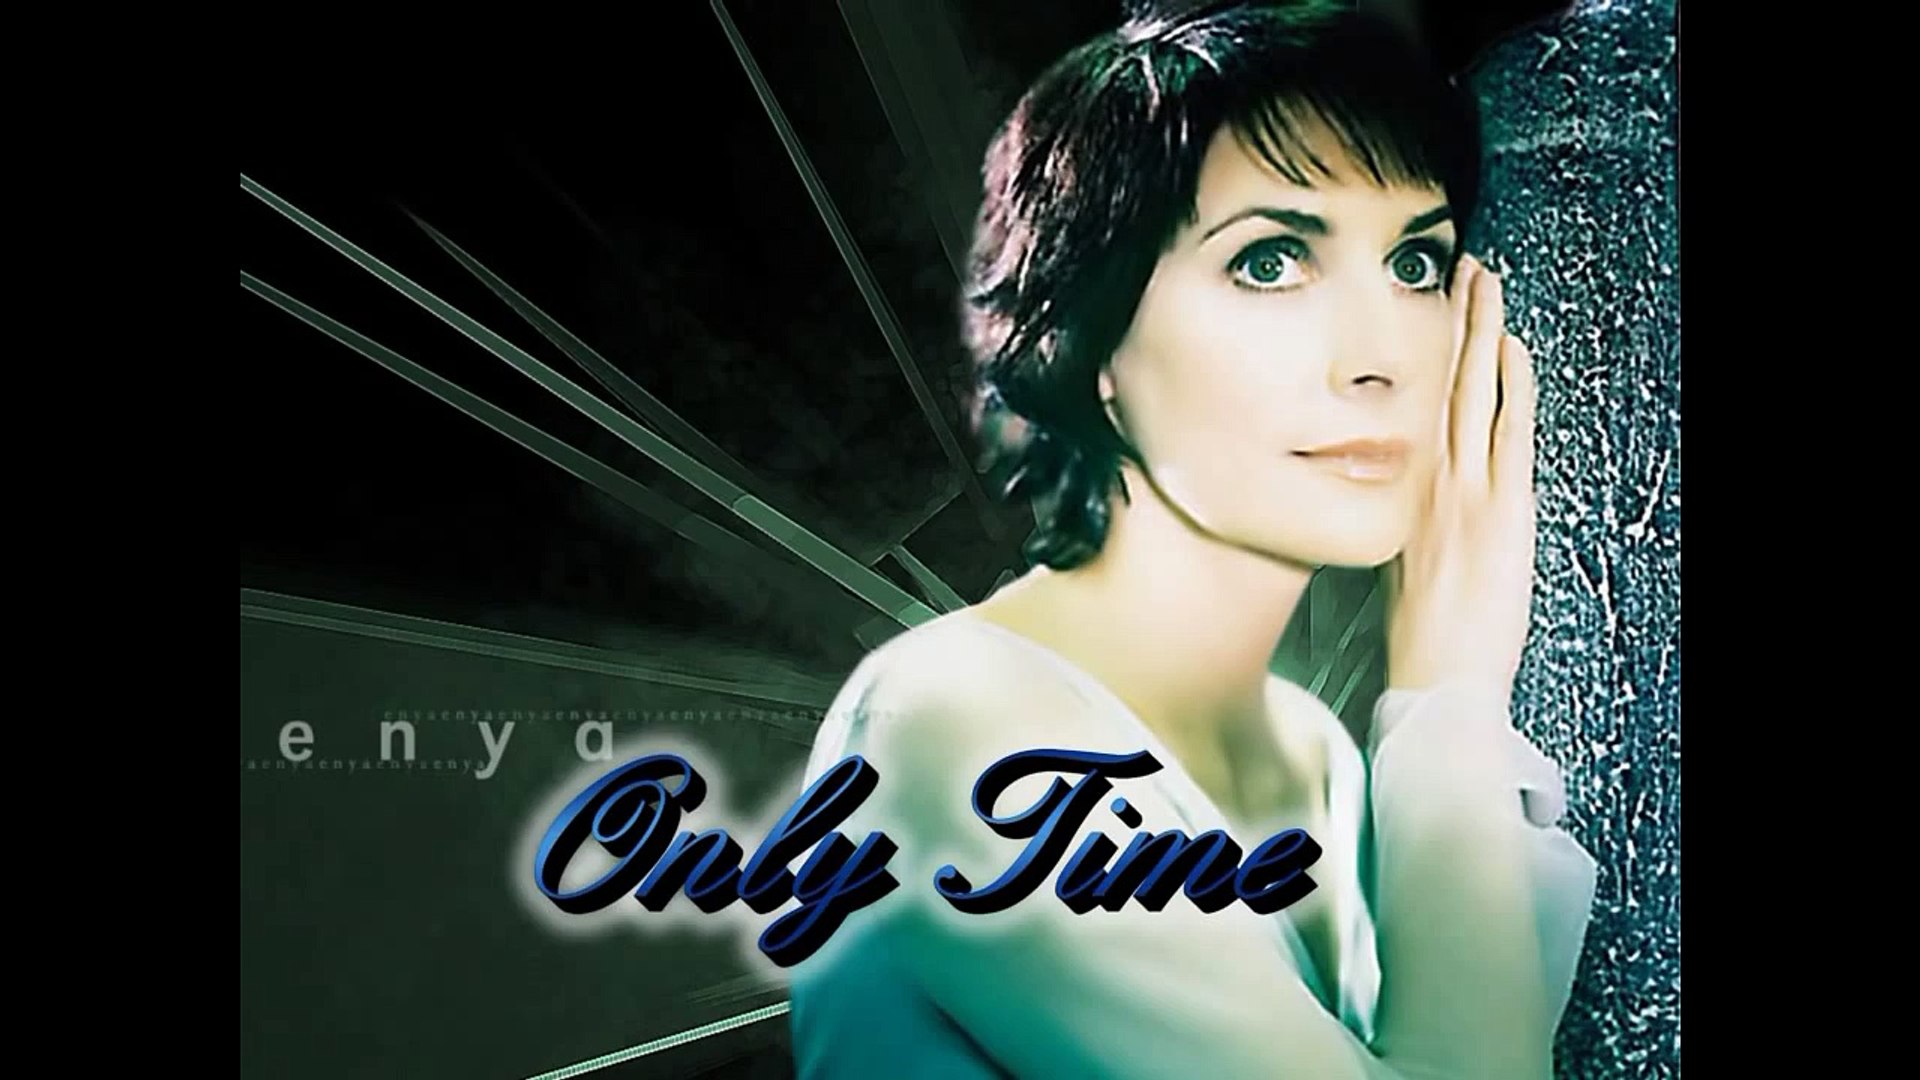 Enya - Only Time "With Lyrics Below" HD - video Dailymotion